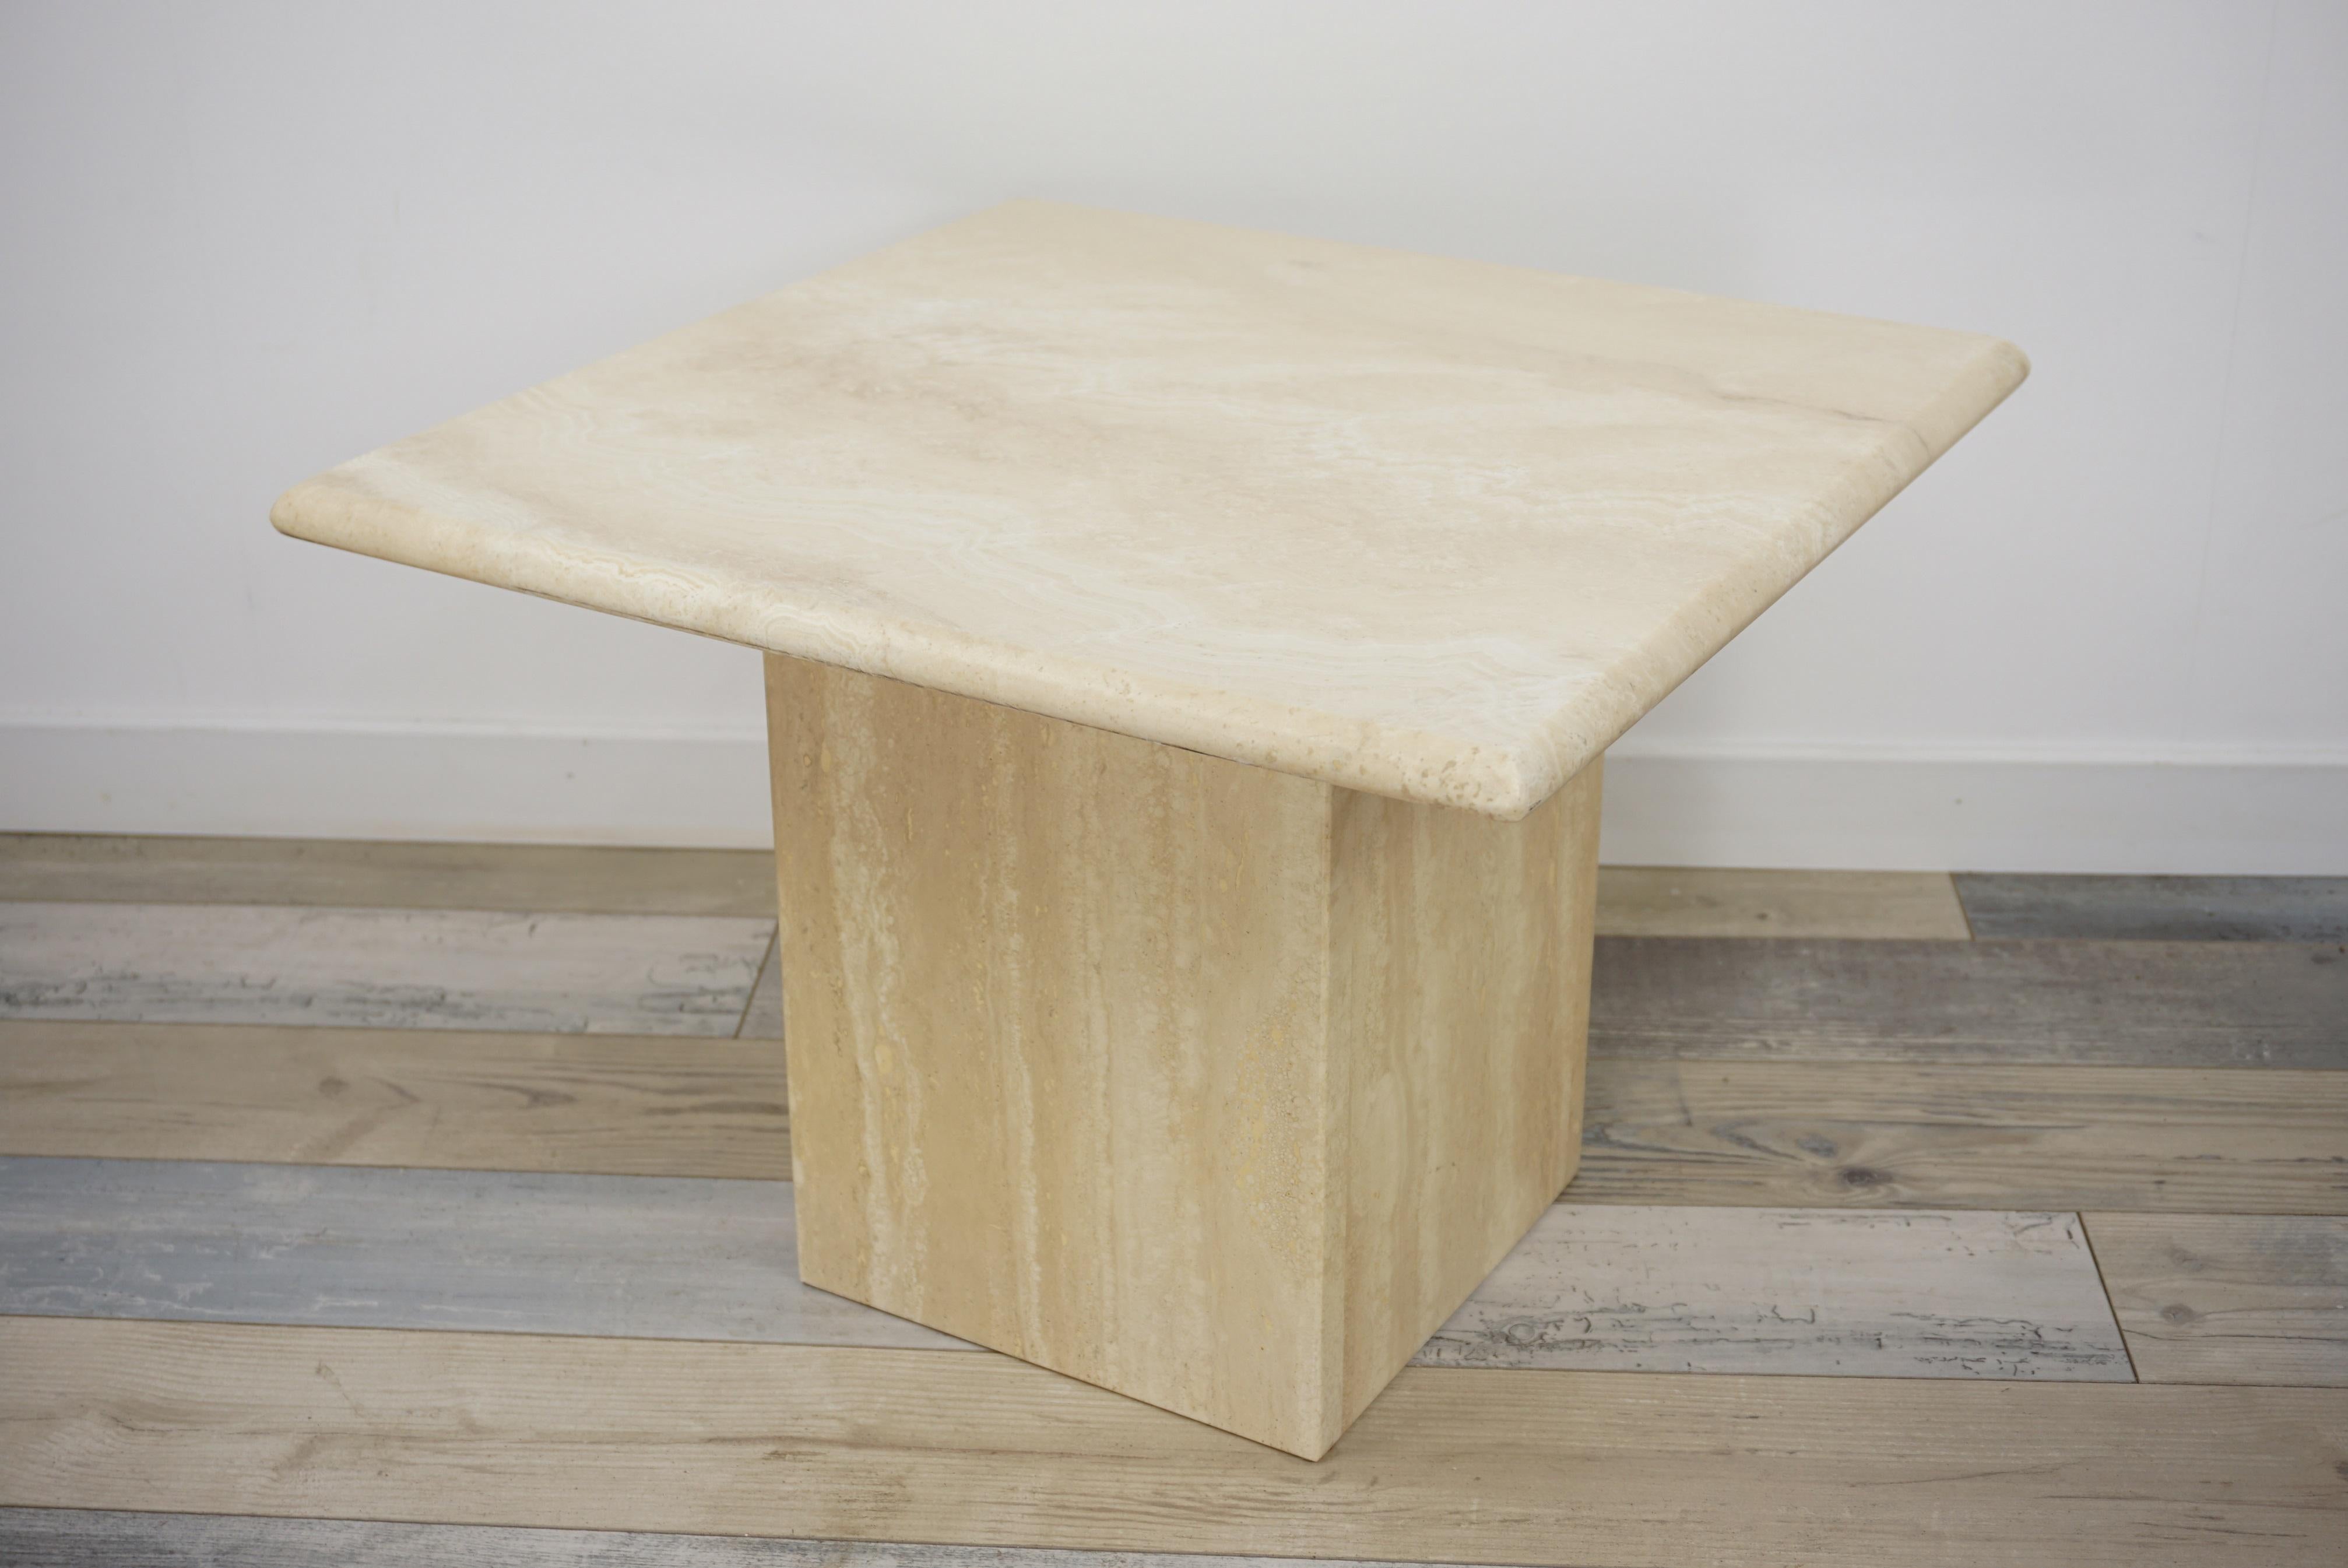 Travertine coffee table, which will find its place in the living room as a side table, at the end of the sofa to put your book or your cup of tea, or even as a pedestal to sublimate a vase, a sculpture, a plant!